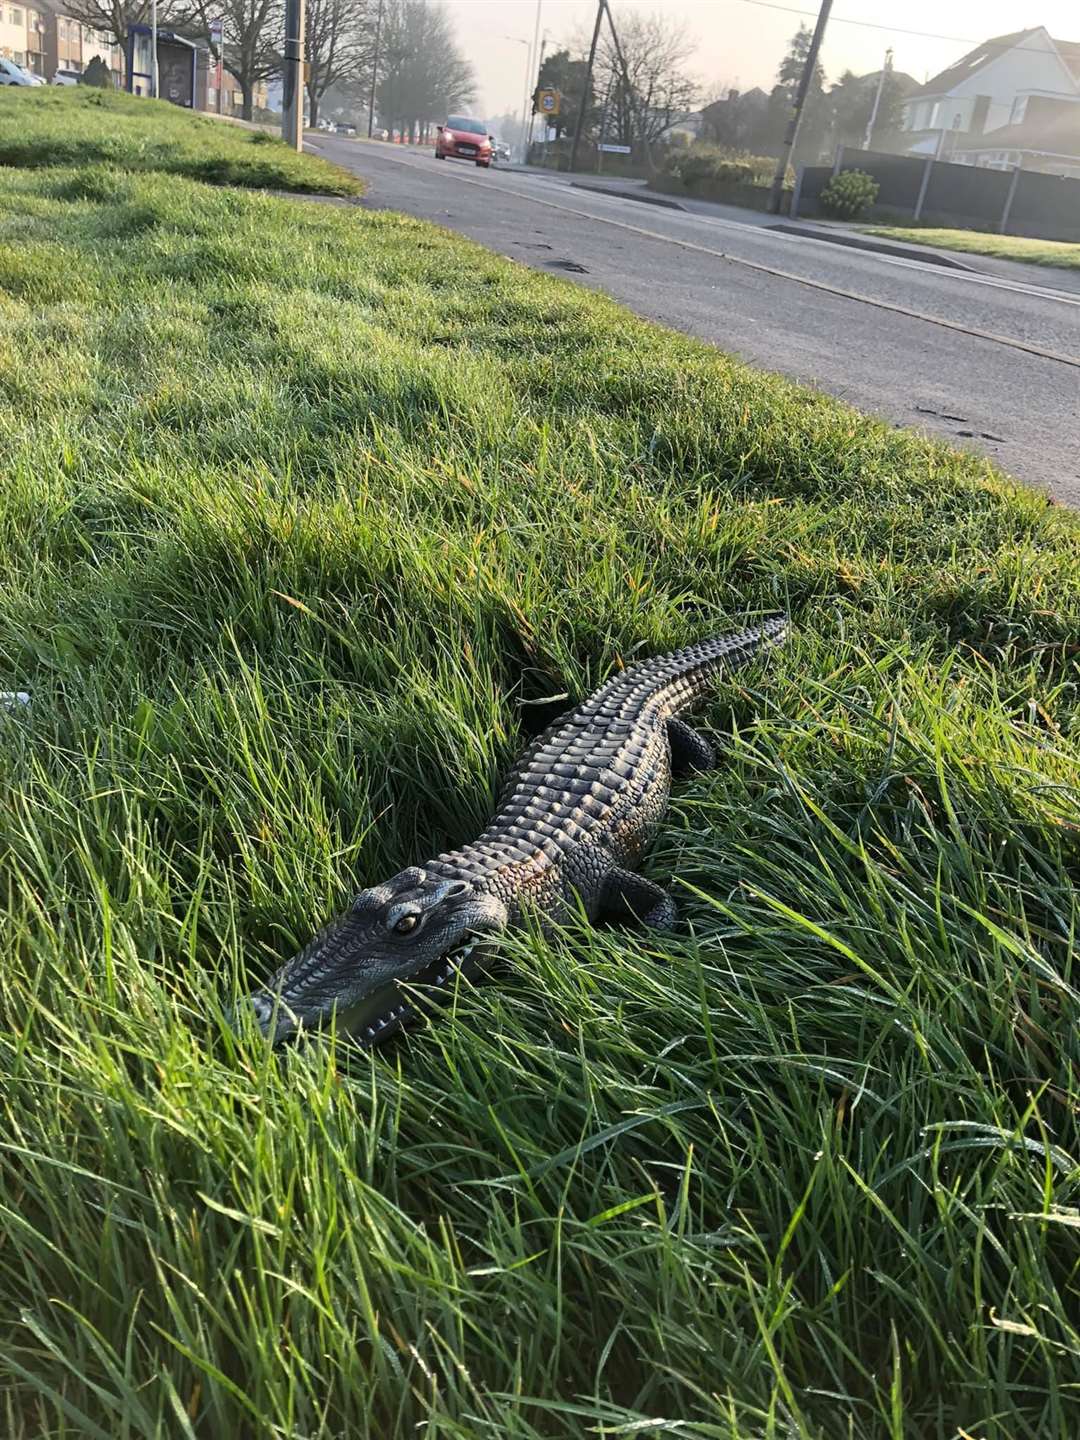 The plastic alligator was found beside a road in Queenborough on the Isle of Sheppey